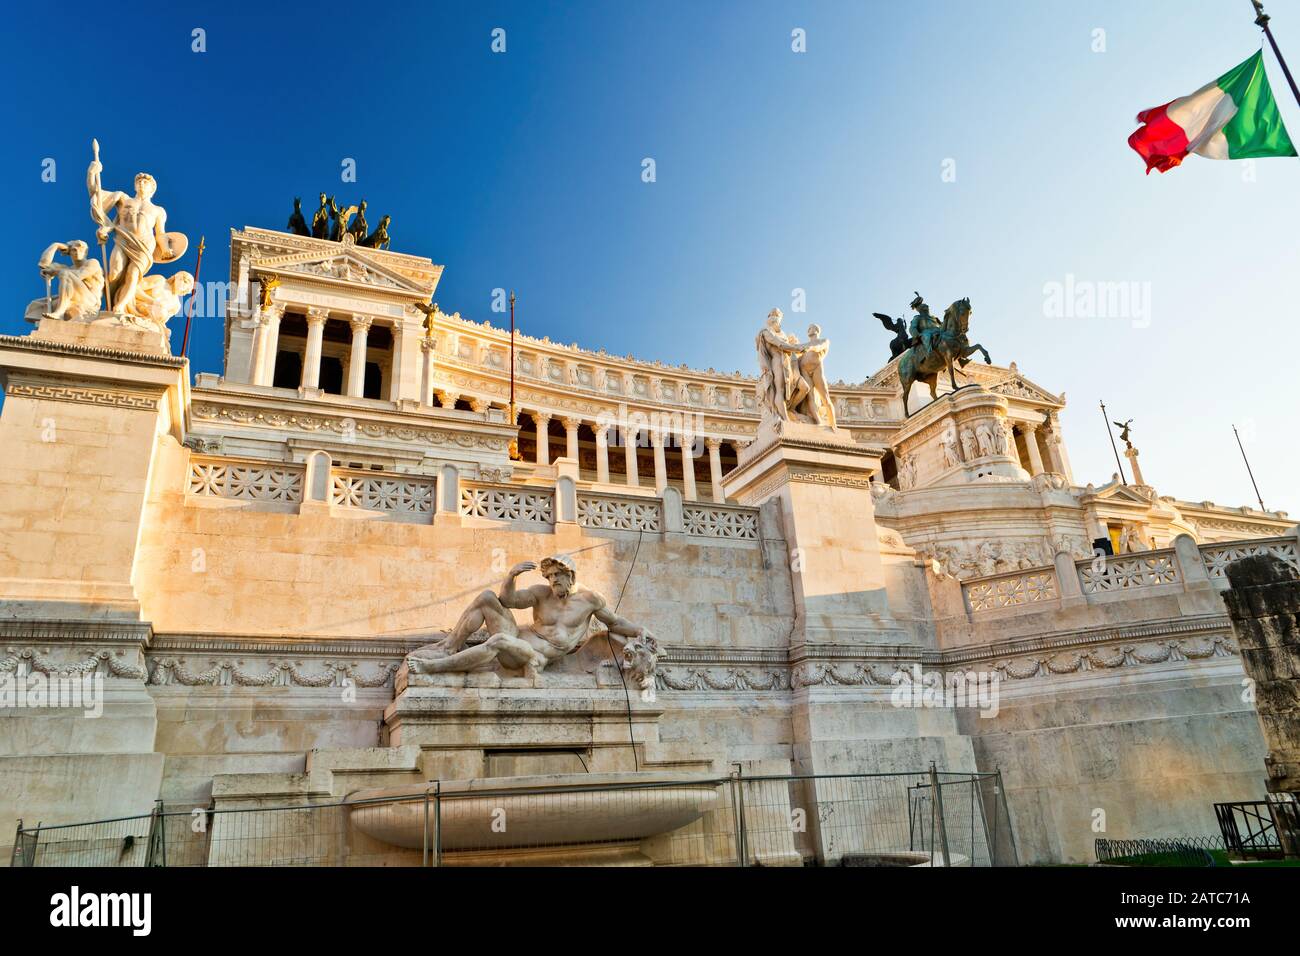 View of the Vittoriano building on the Piazza Venezia at sunset, Rome Stock Photo